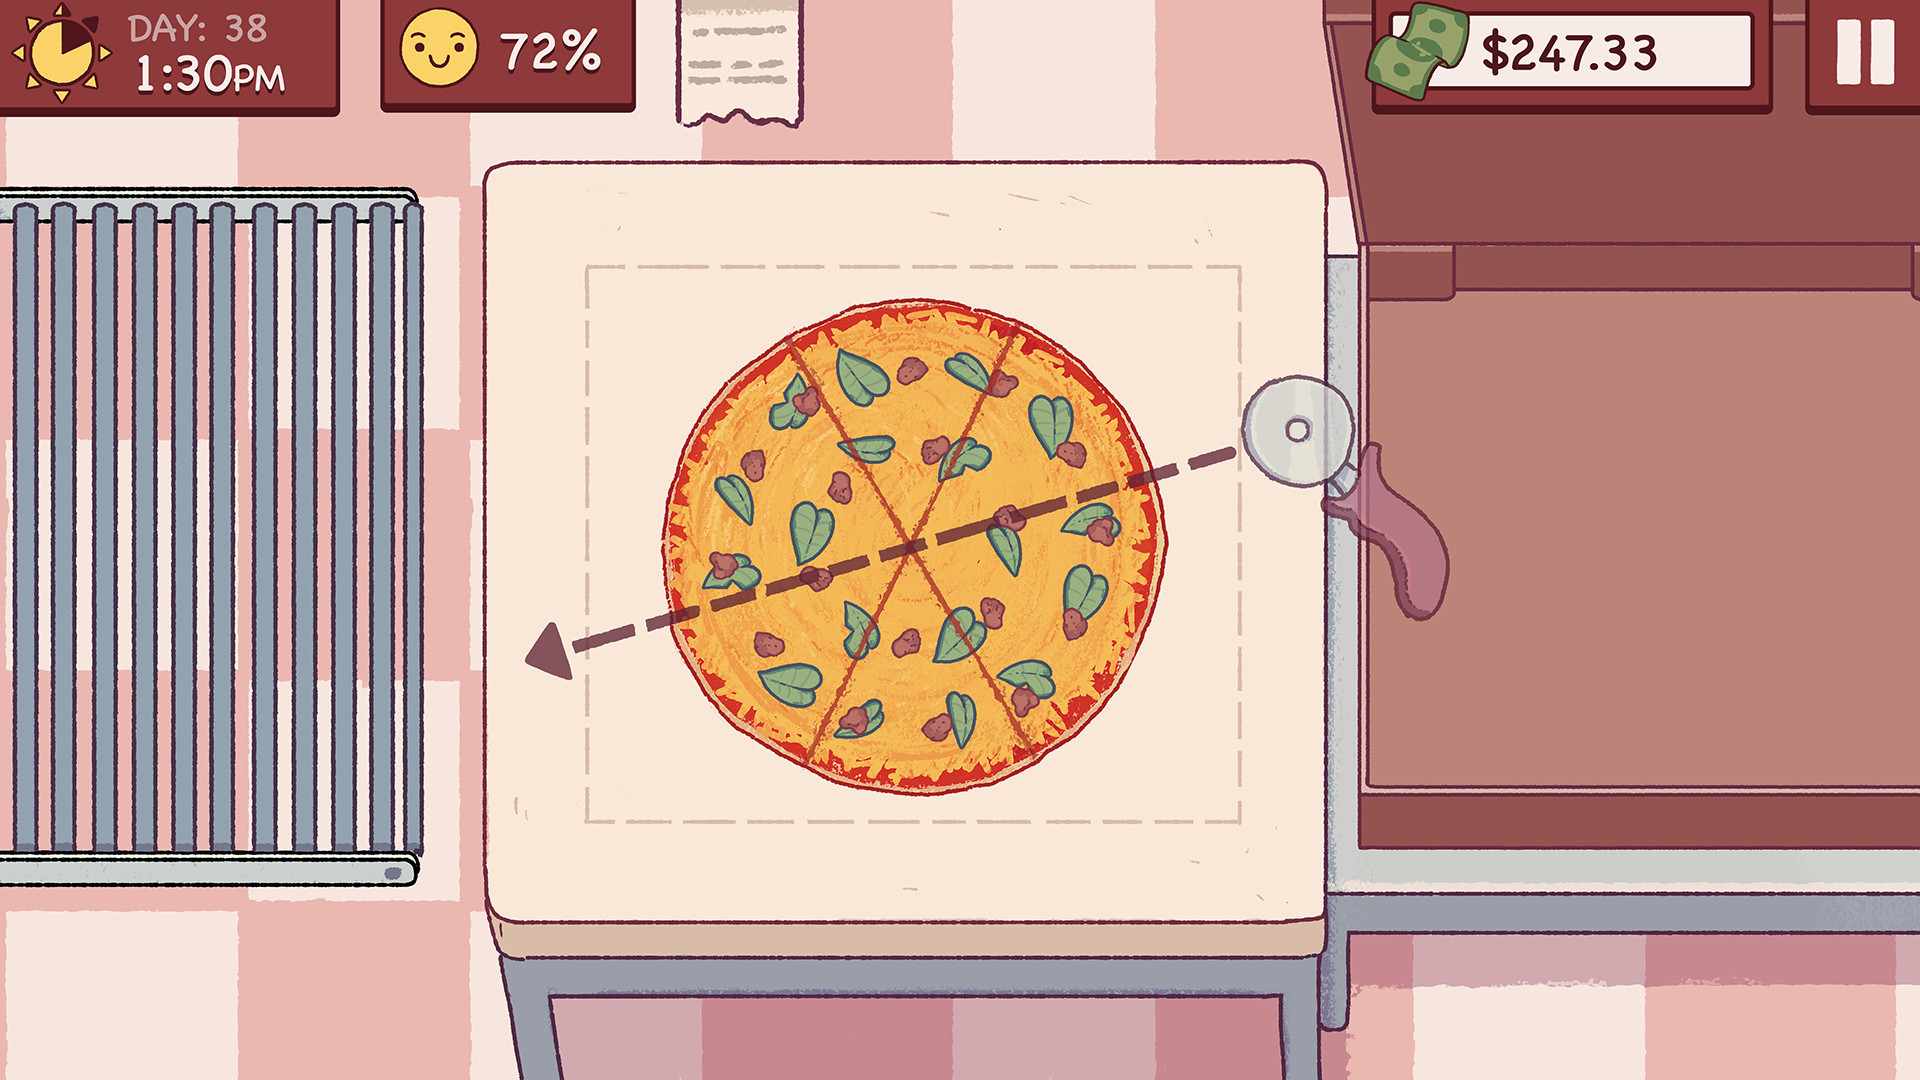 Good Pizza, Great Pizza - Cooking Simulator Game - SteamSpy - All